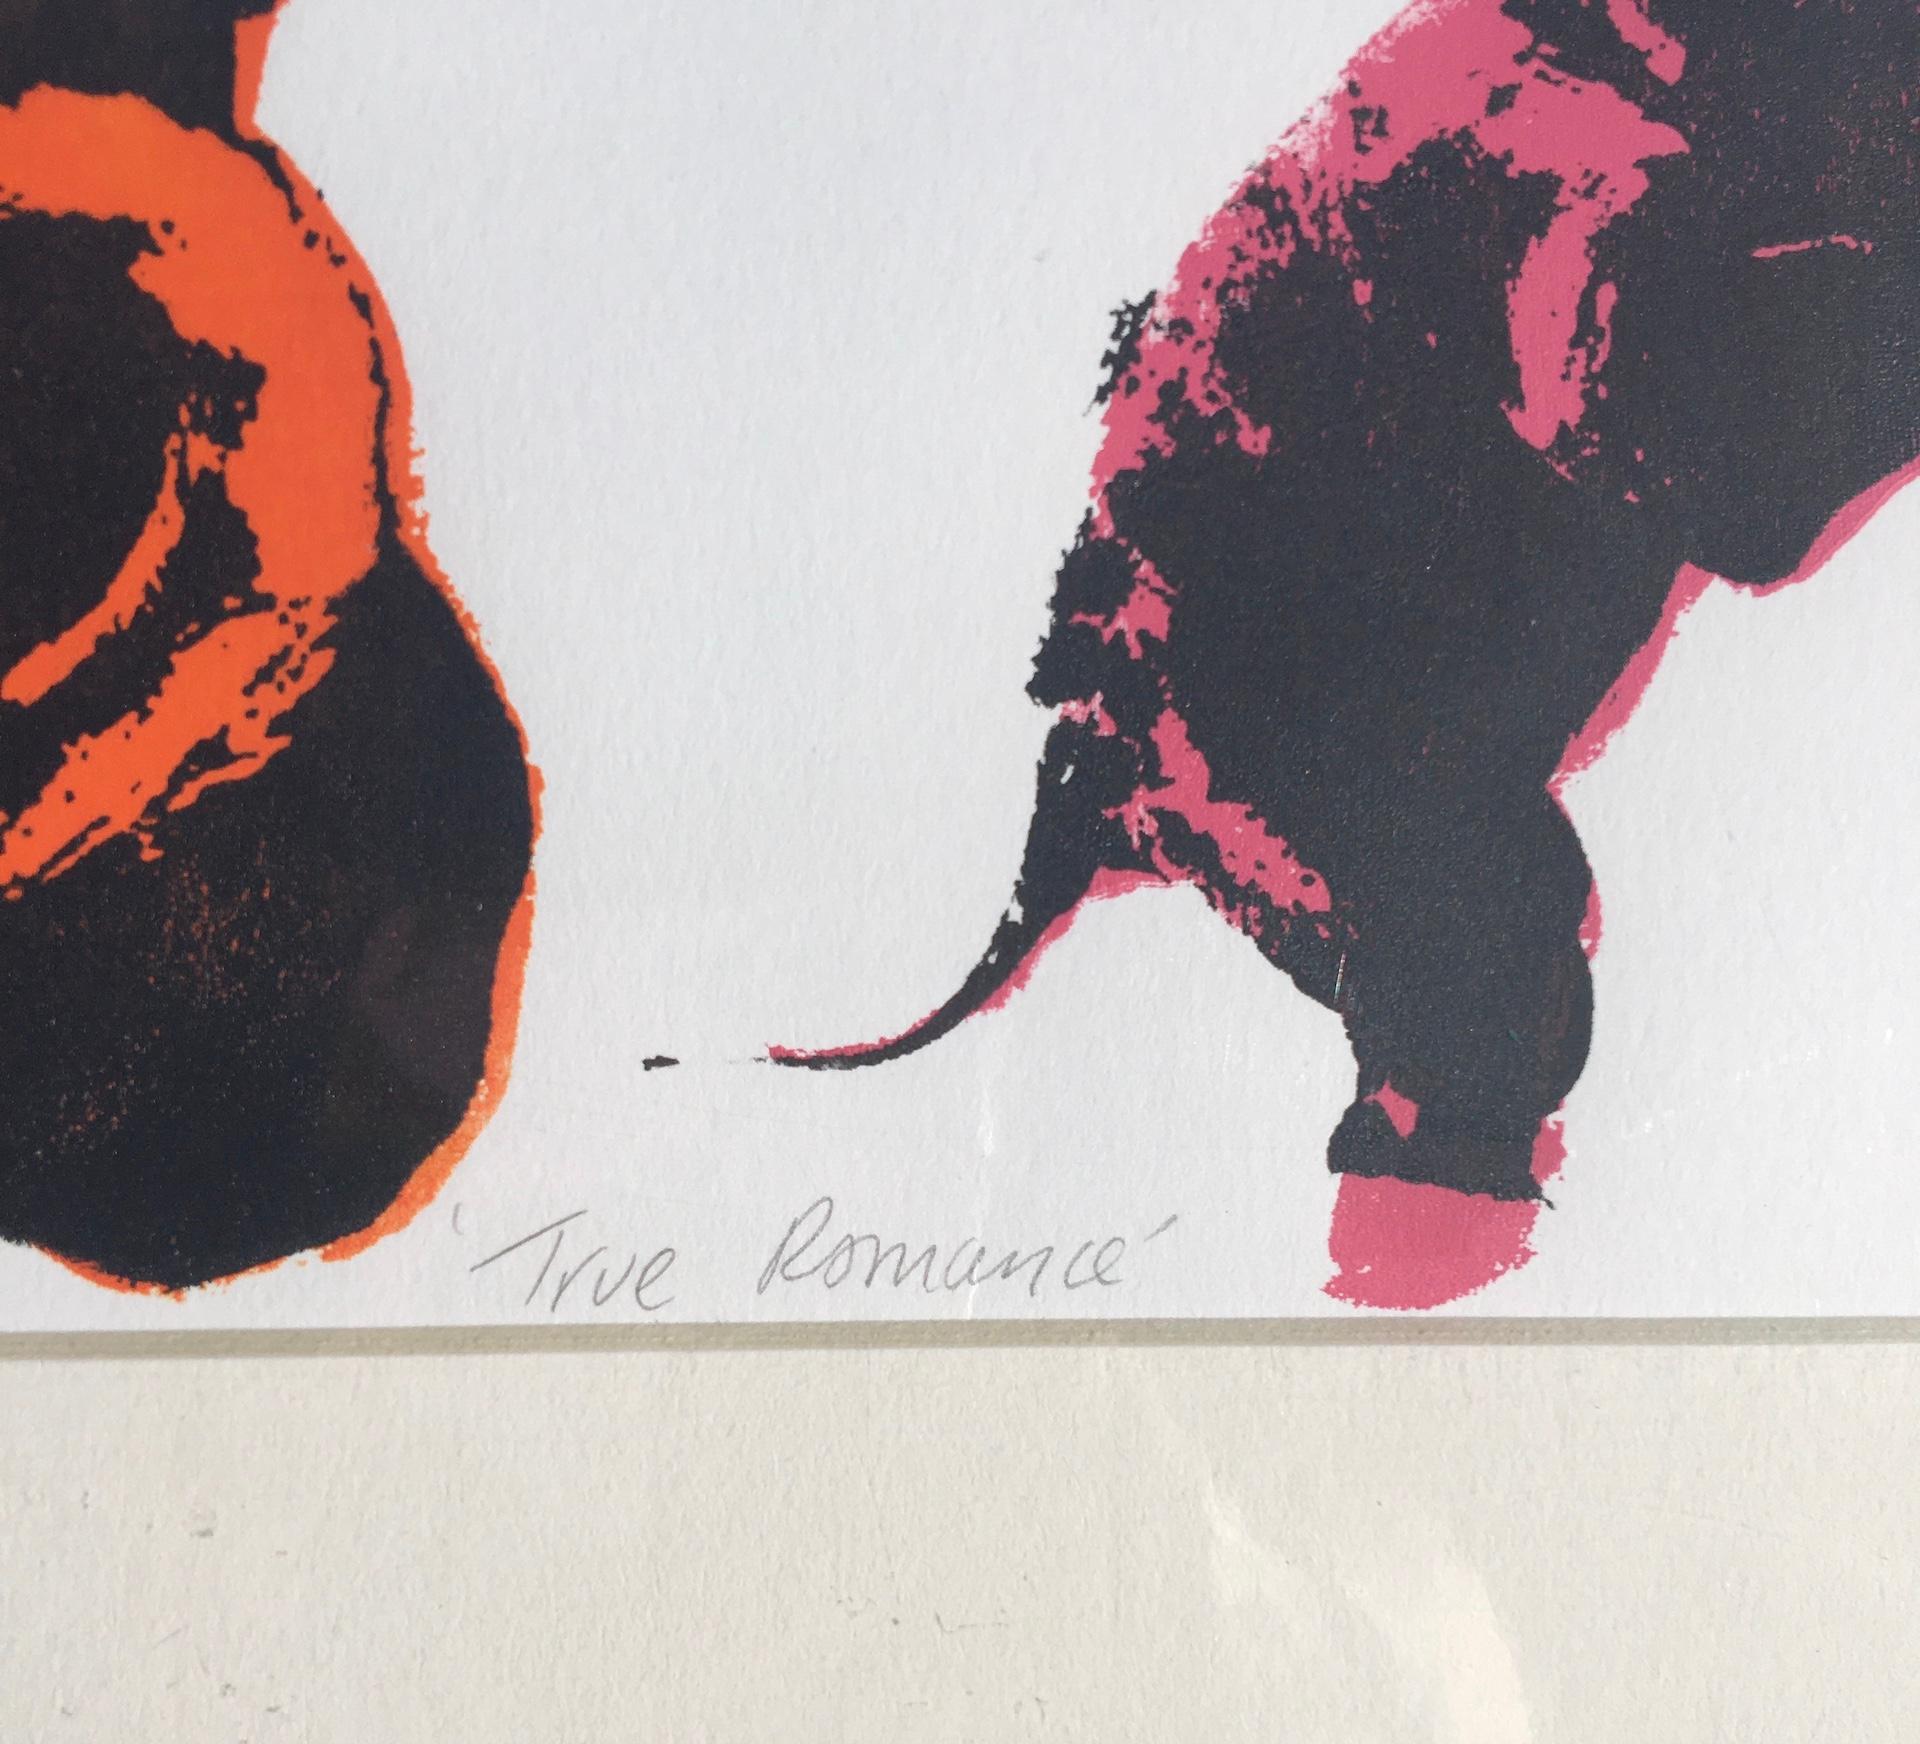 Katie Edwards
True Romance
Limited Edition Print
Screen Print
Sold Unframed
(Please note that in situ images are purely an indication of how a piece may look).

True Romance by Katie Edwards- created in 2015 for a special Valentine’s Art Exhibition,